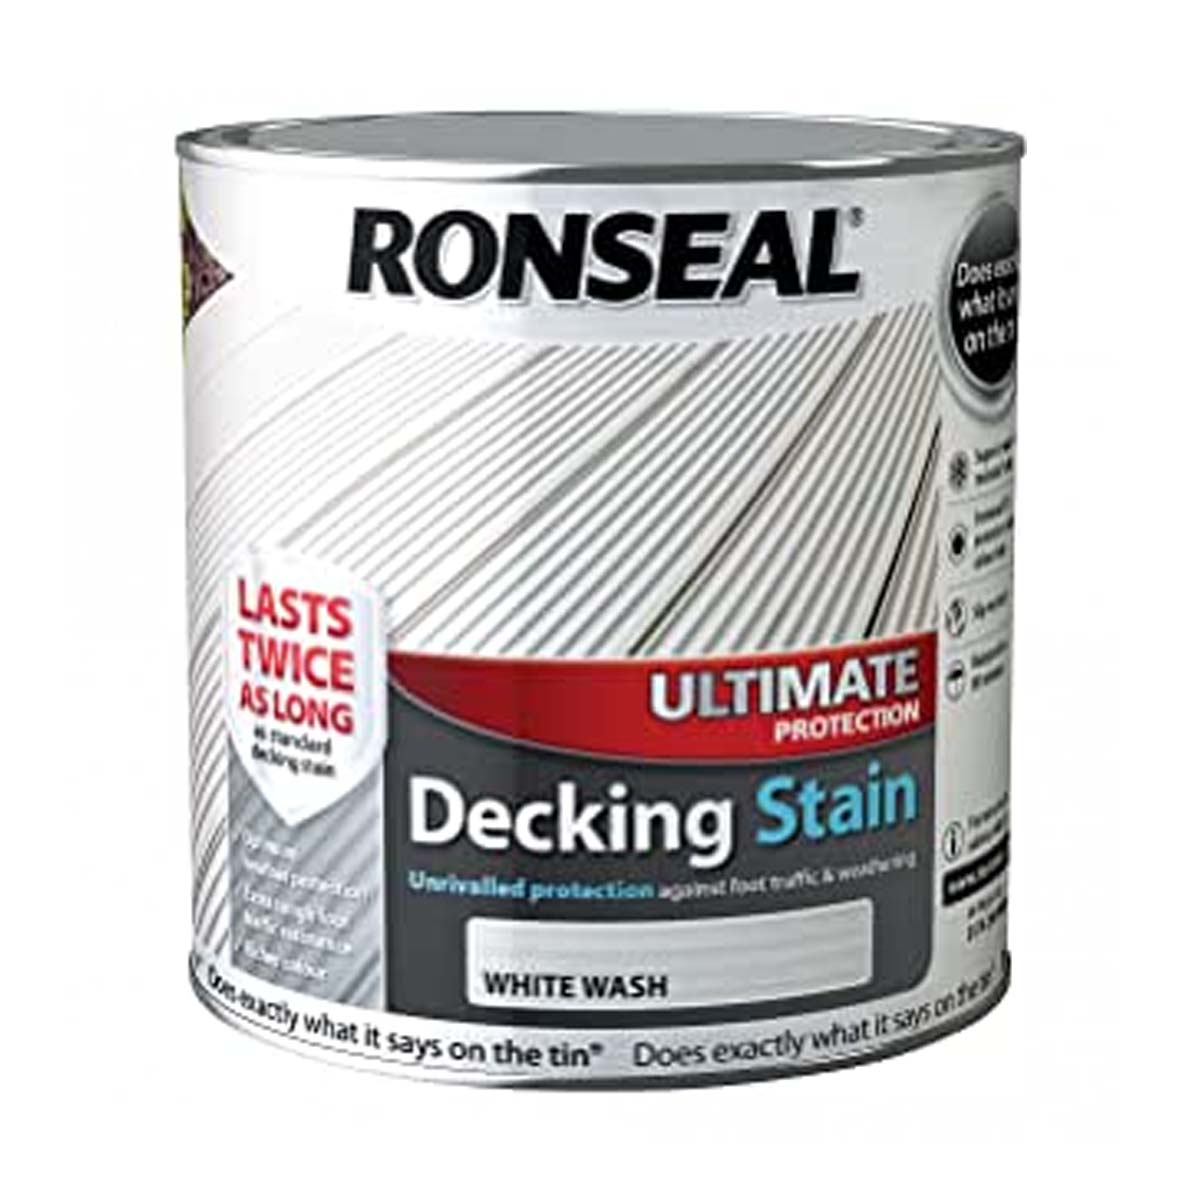 Ronseal Ultimate Protection Decking Stain White Wash 2.5L (36910)